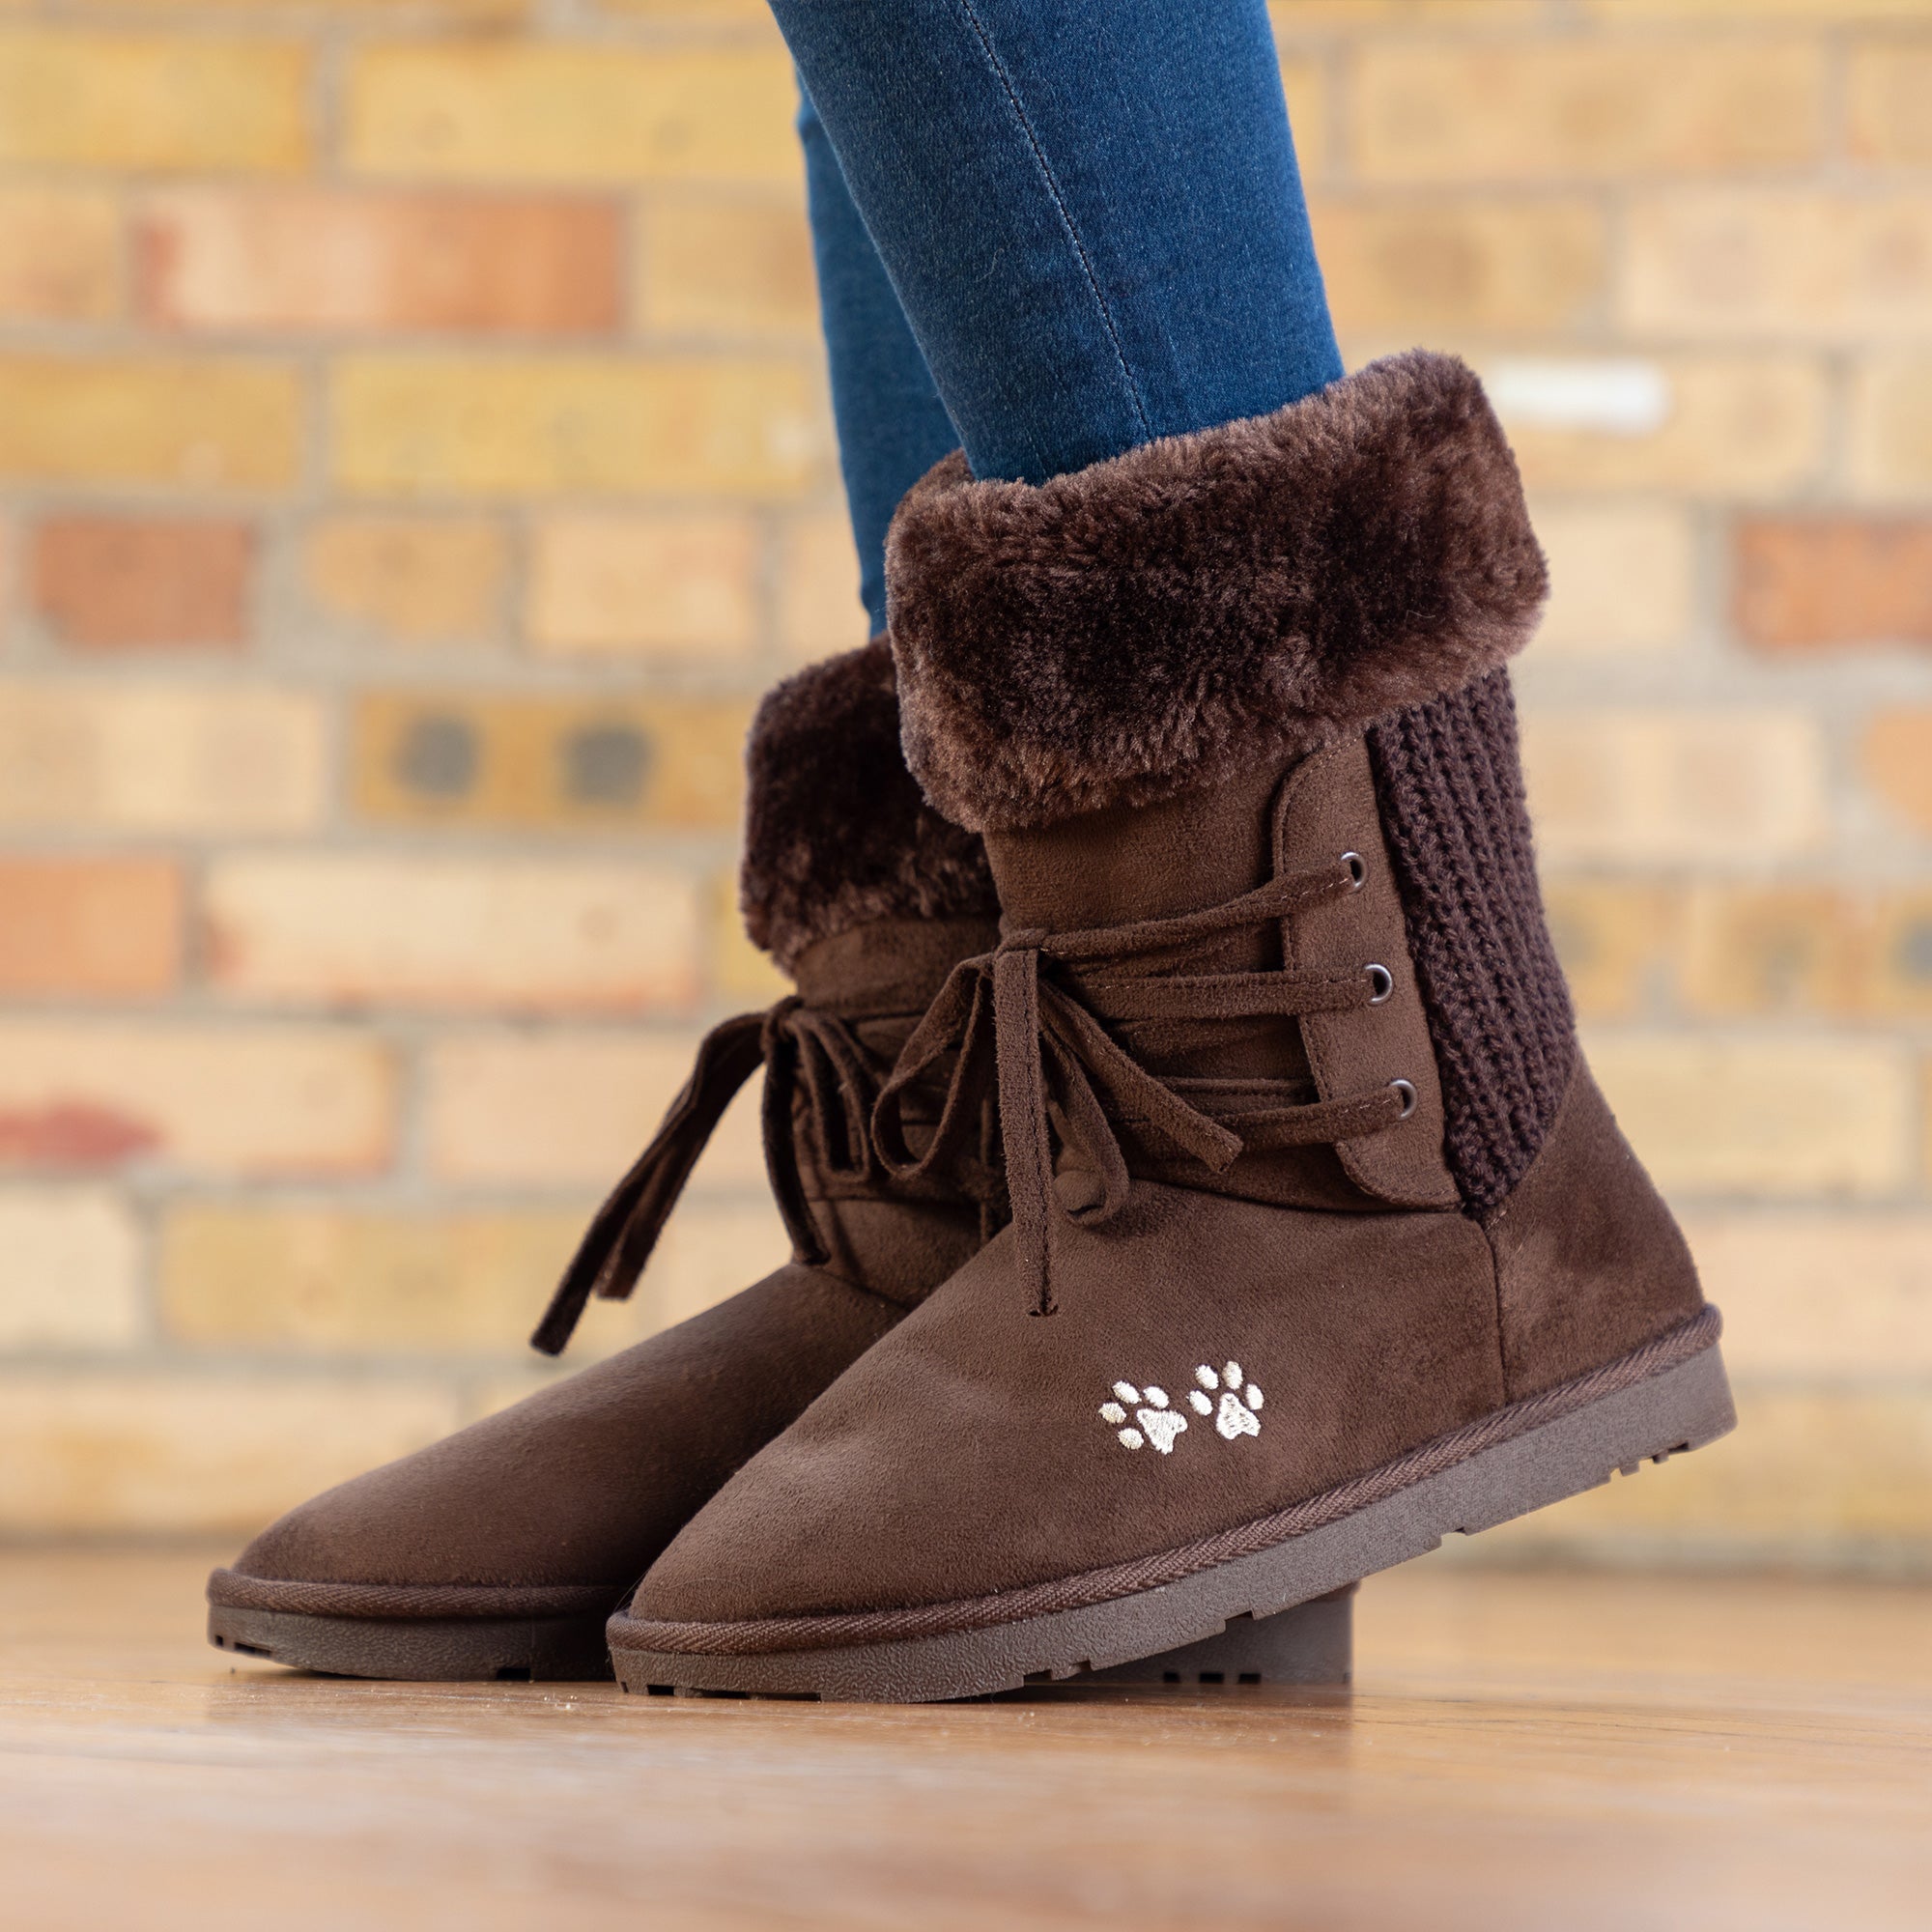 Lace-Up Paw Print Sweater Boots - Brown - 10